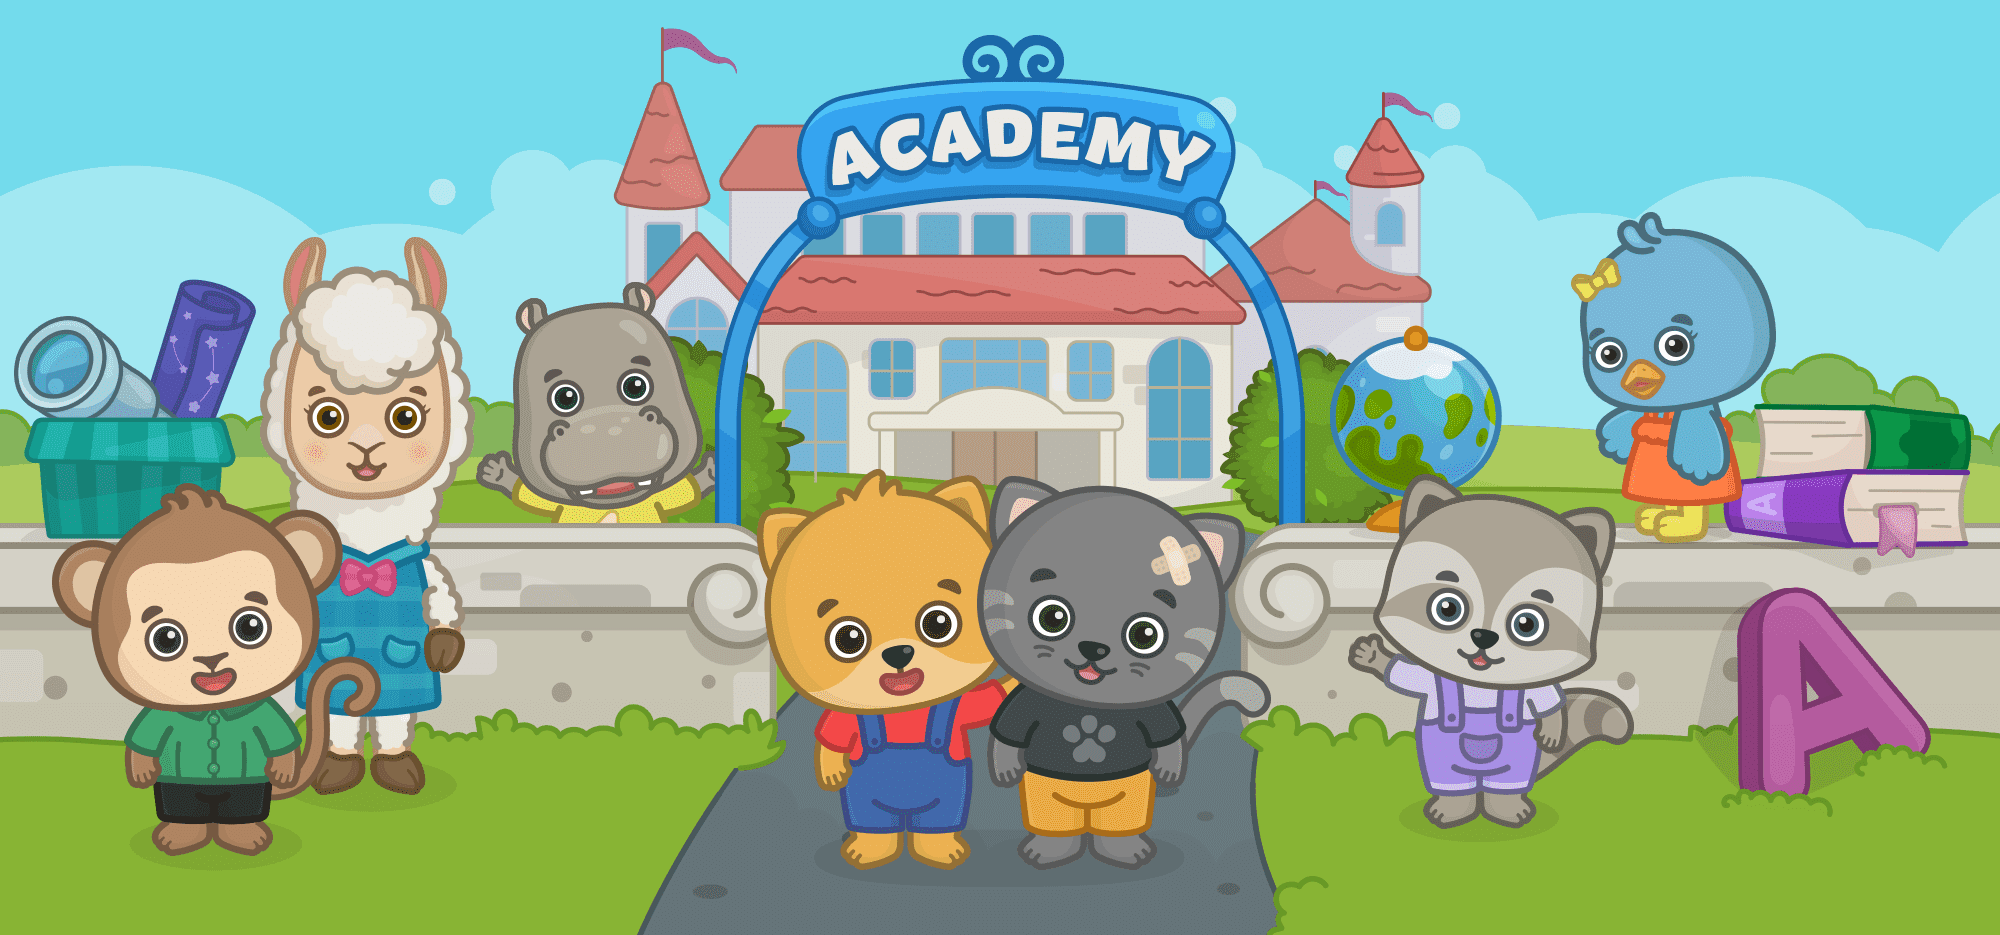 The Academy is perfect for preschoolers